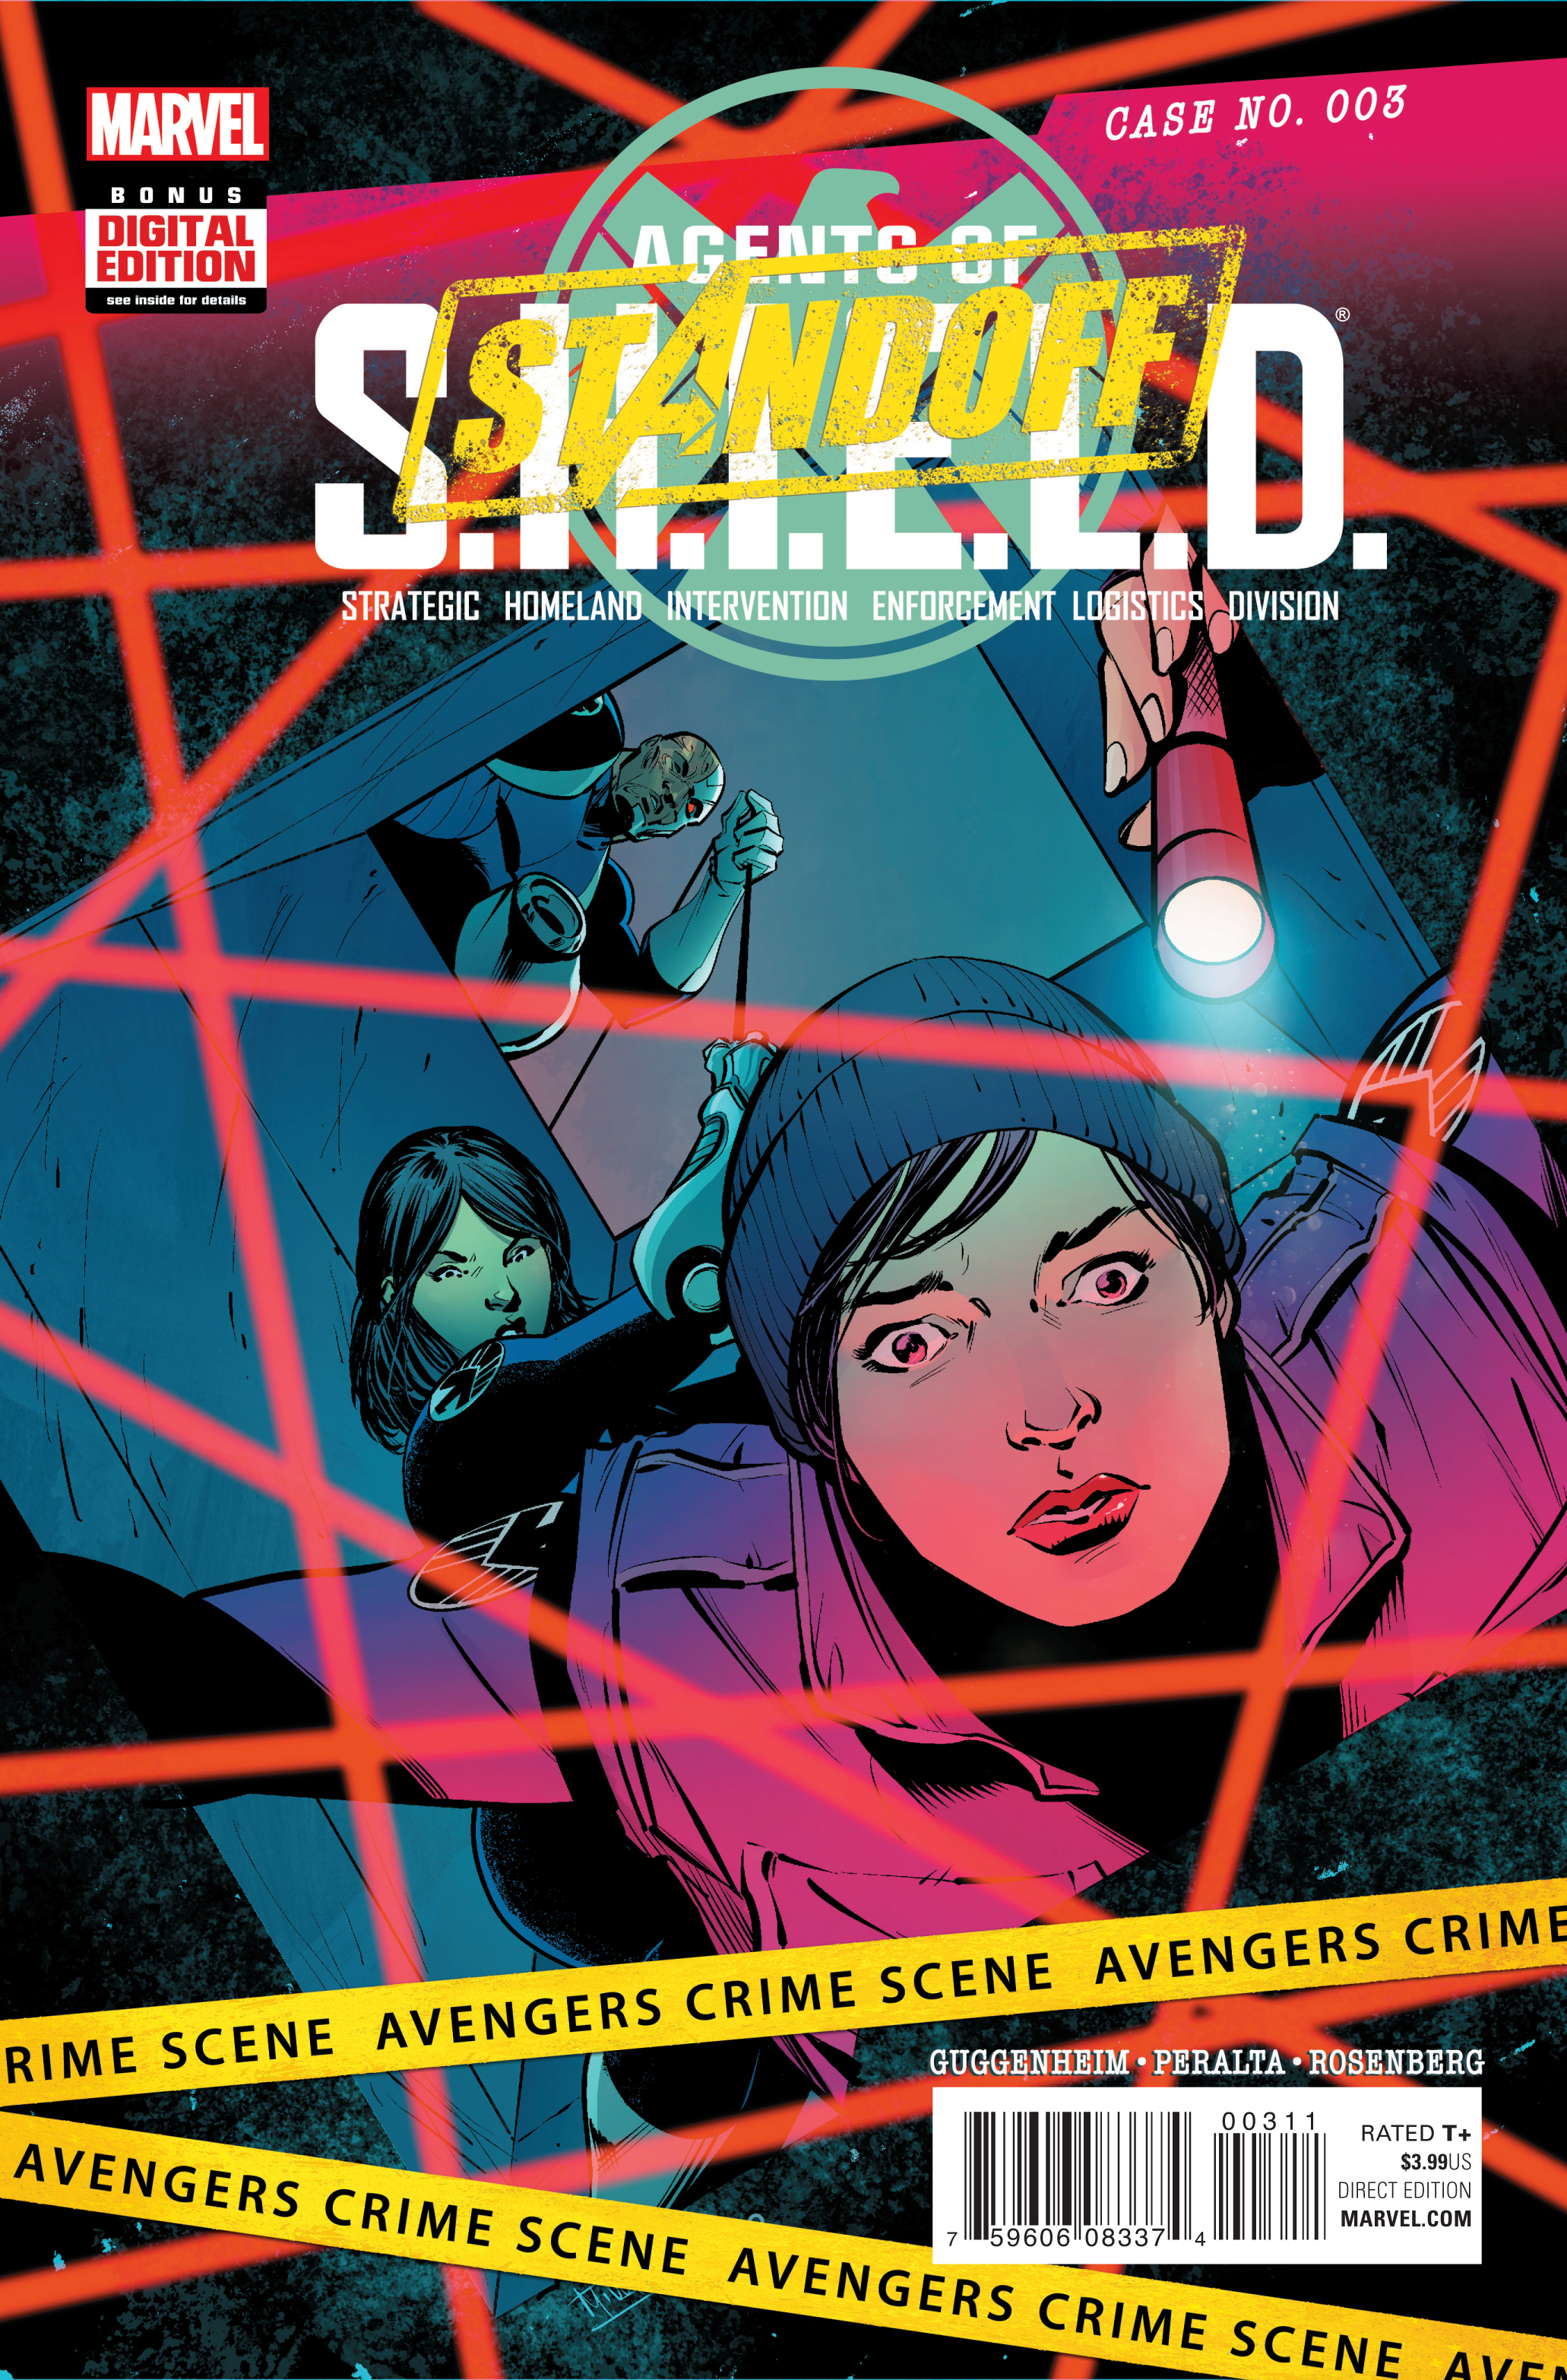 AGENTS OF SHIELD #3 ASO